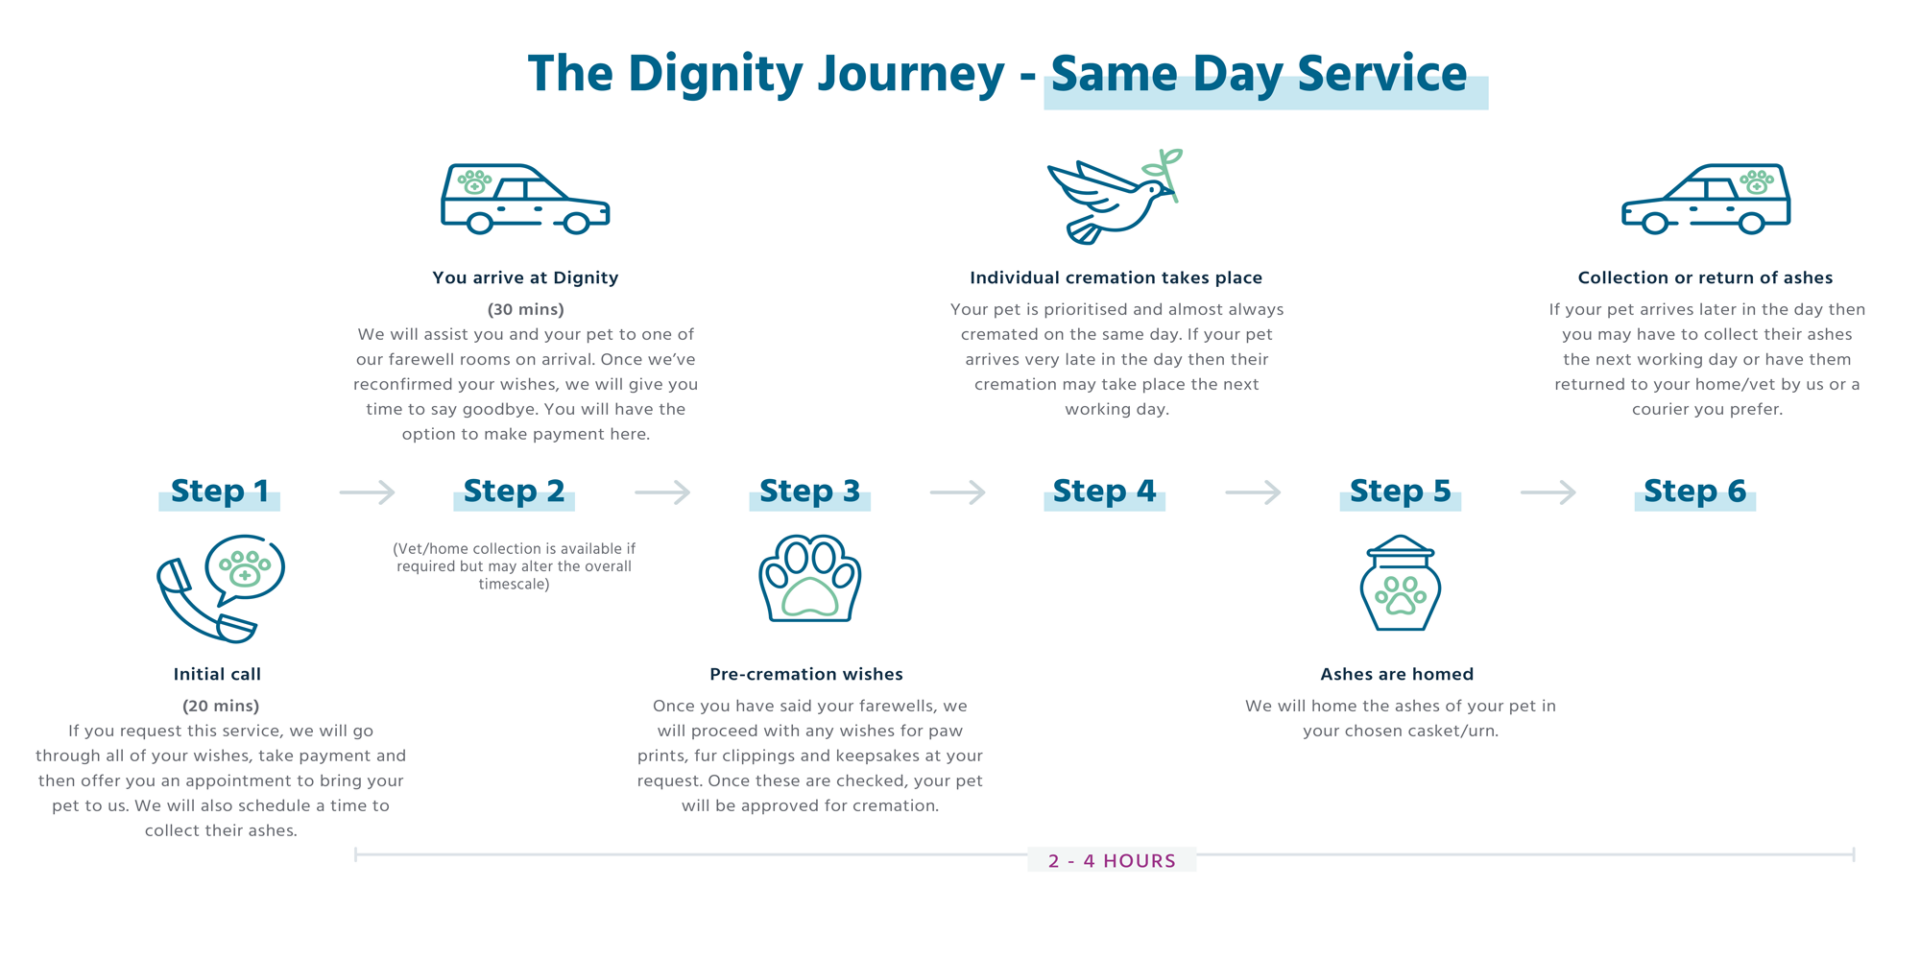 The Dignity Journey - Same Day Service Infographic